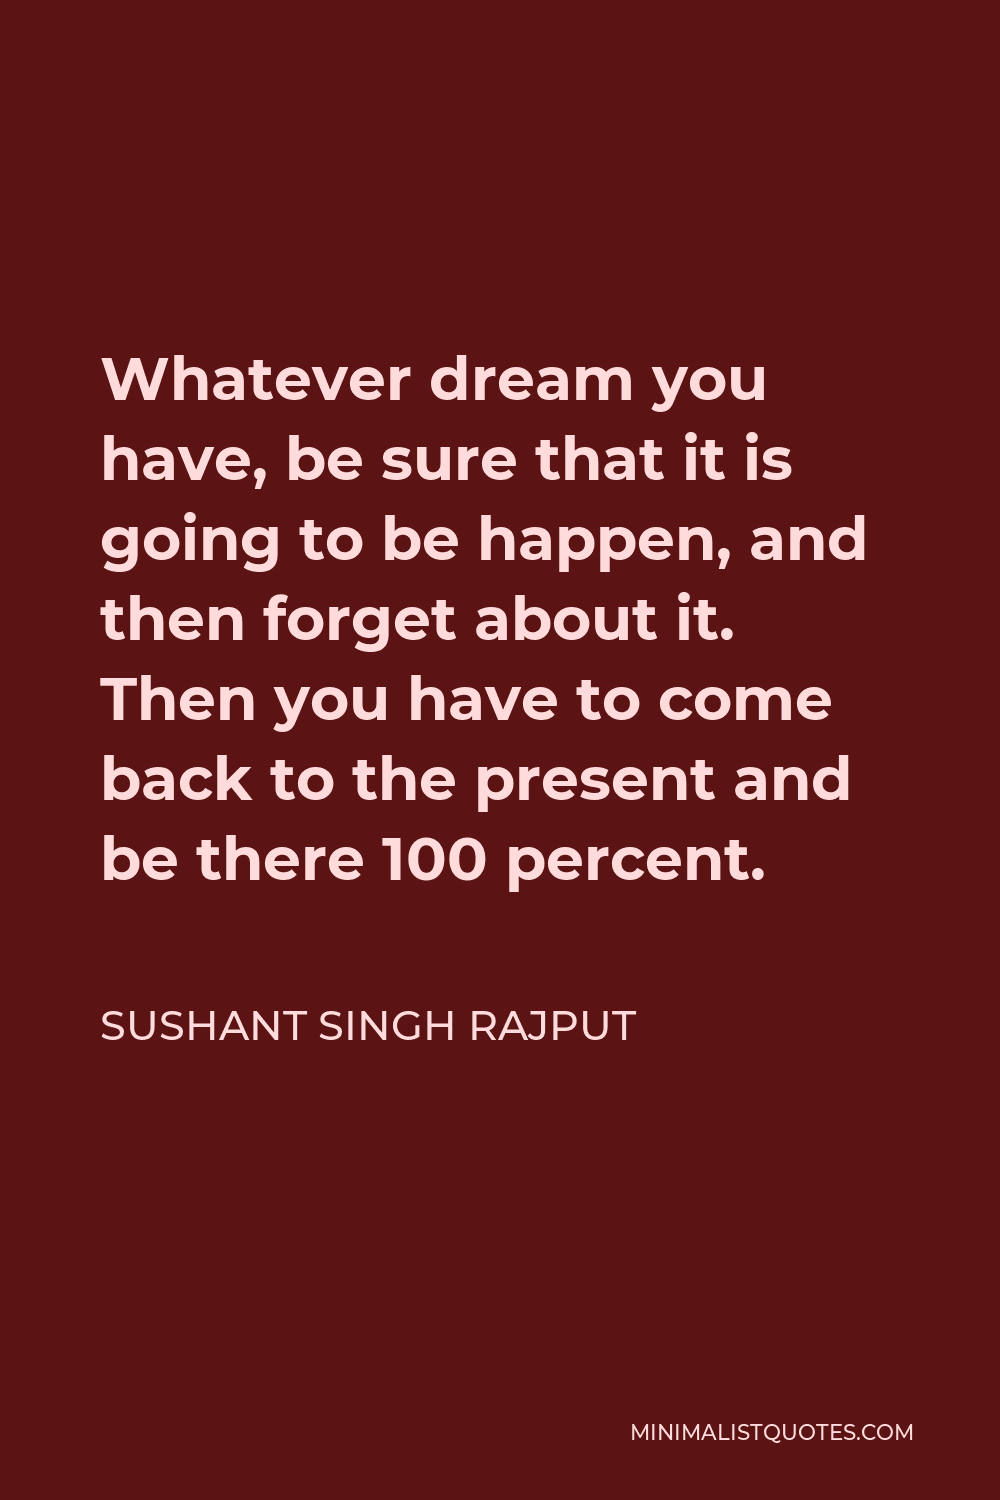 Sushant Singh Rajput Quote - Whatever dream you have, be sure that it is going to be happen, and then forget about it. Then you have to come back to the present and be there 100 percent.